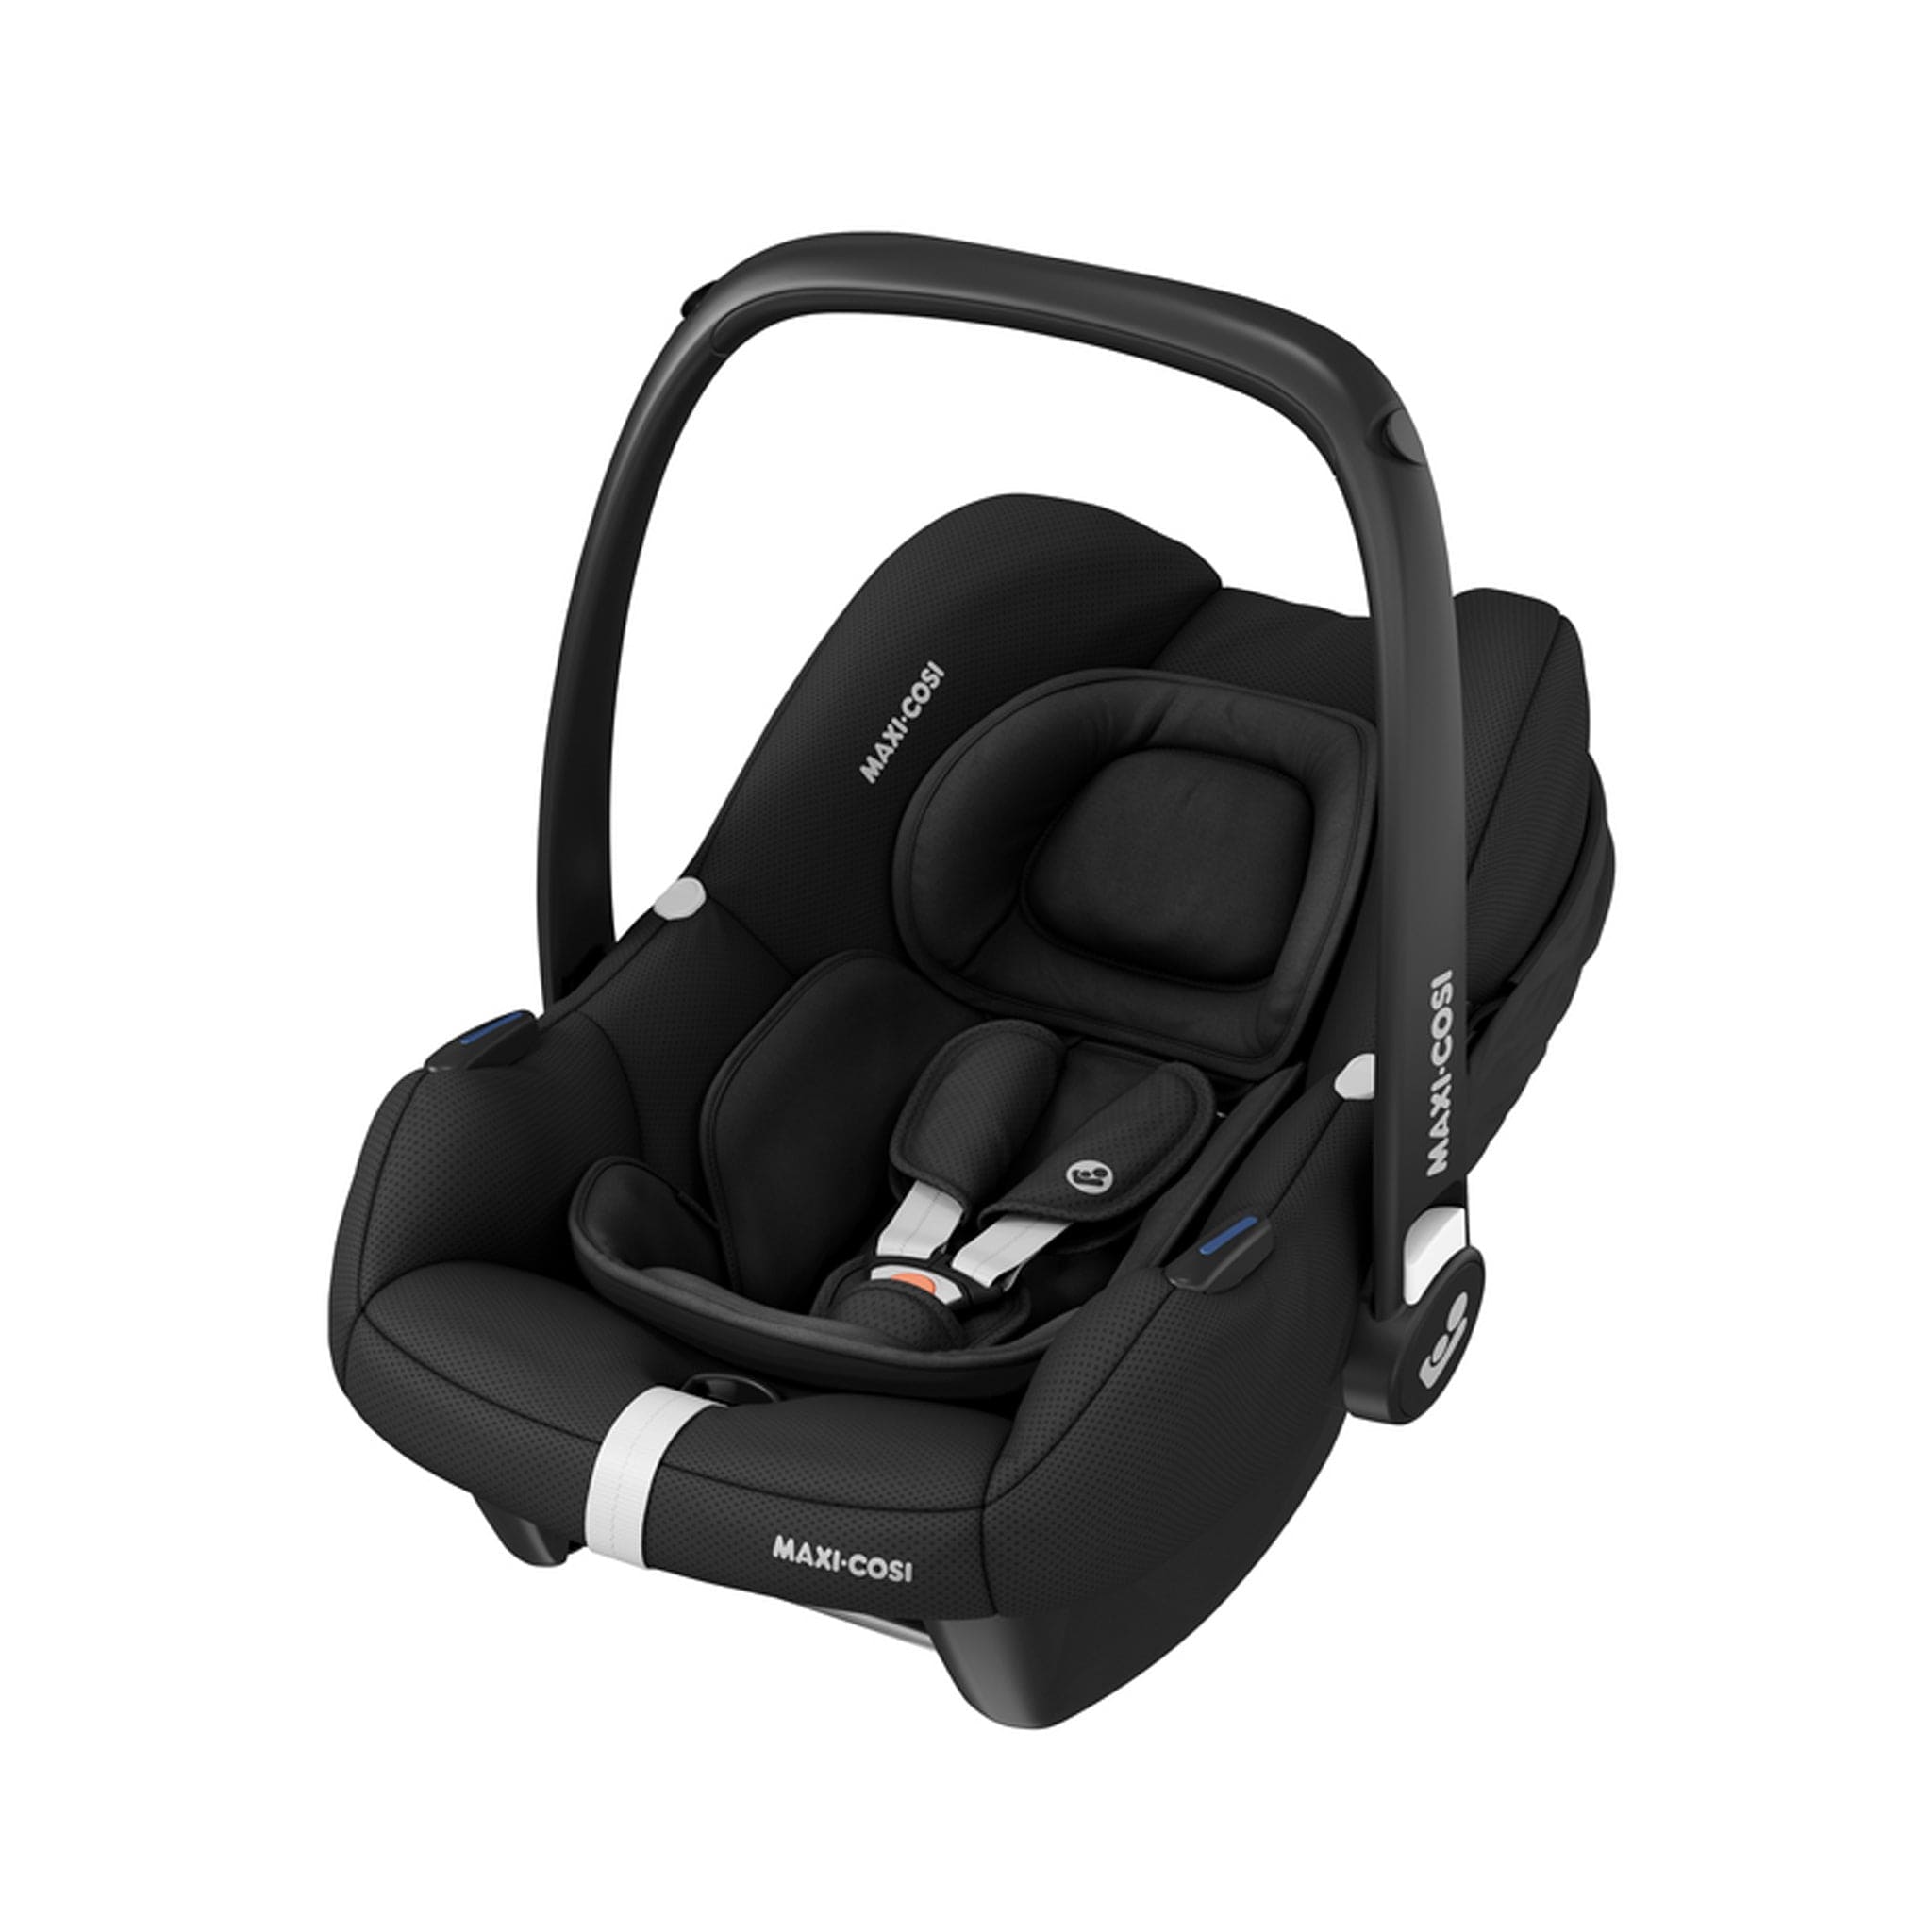 Silver Cross travel systems Silver Cross Tide 3 in 1 Cabriofix Travel System - Sage